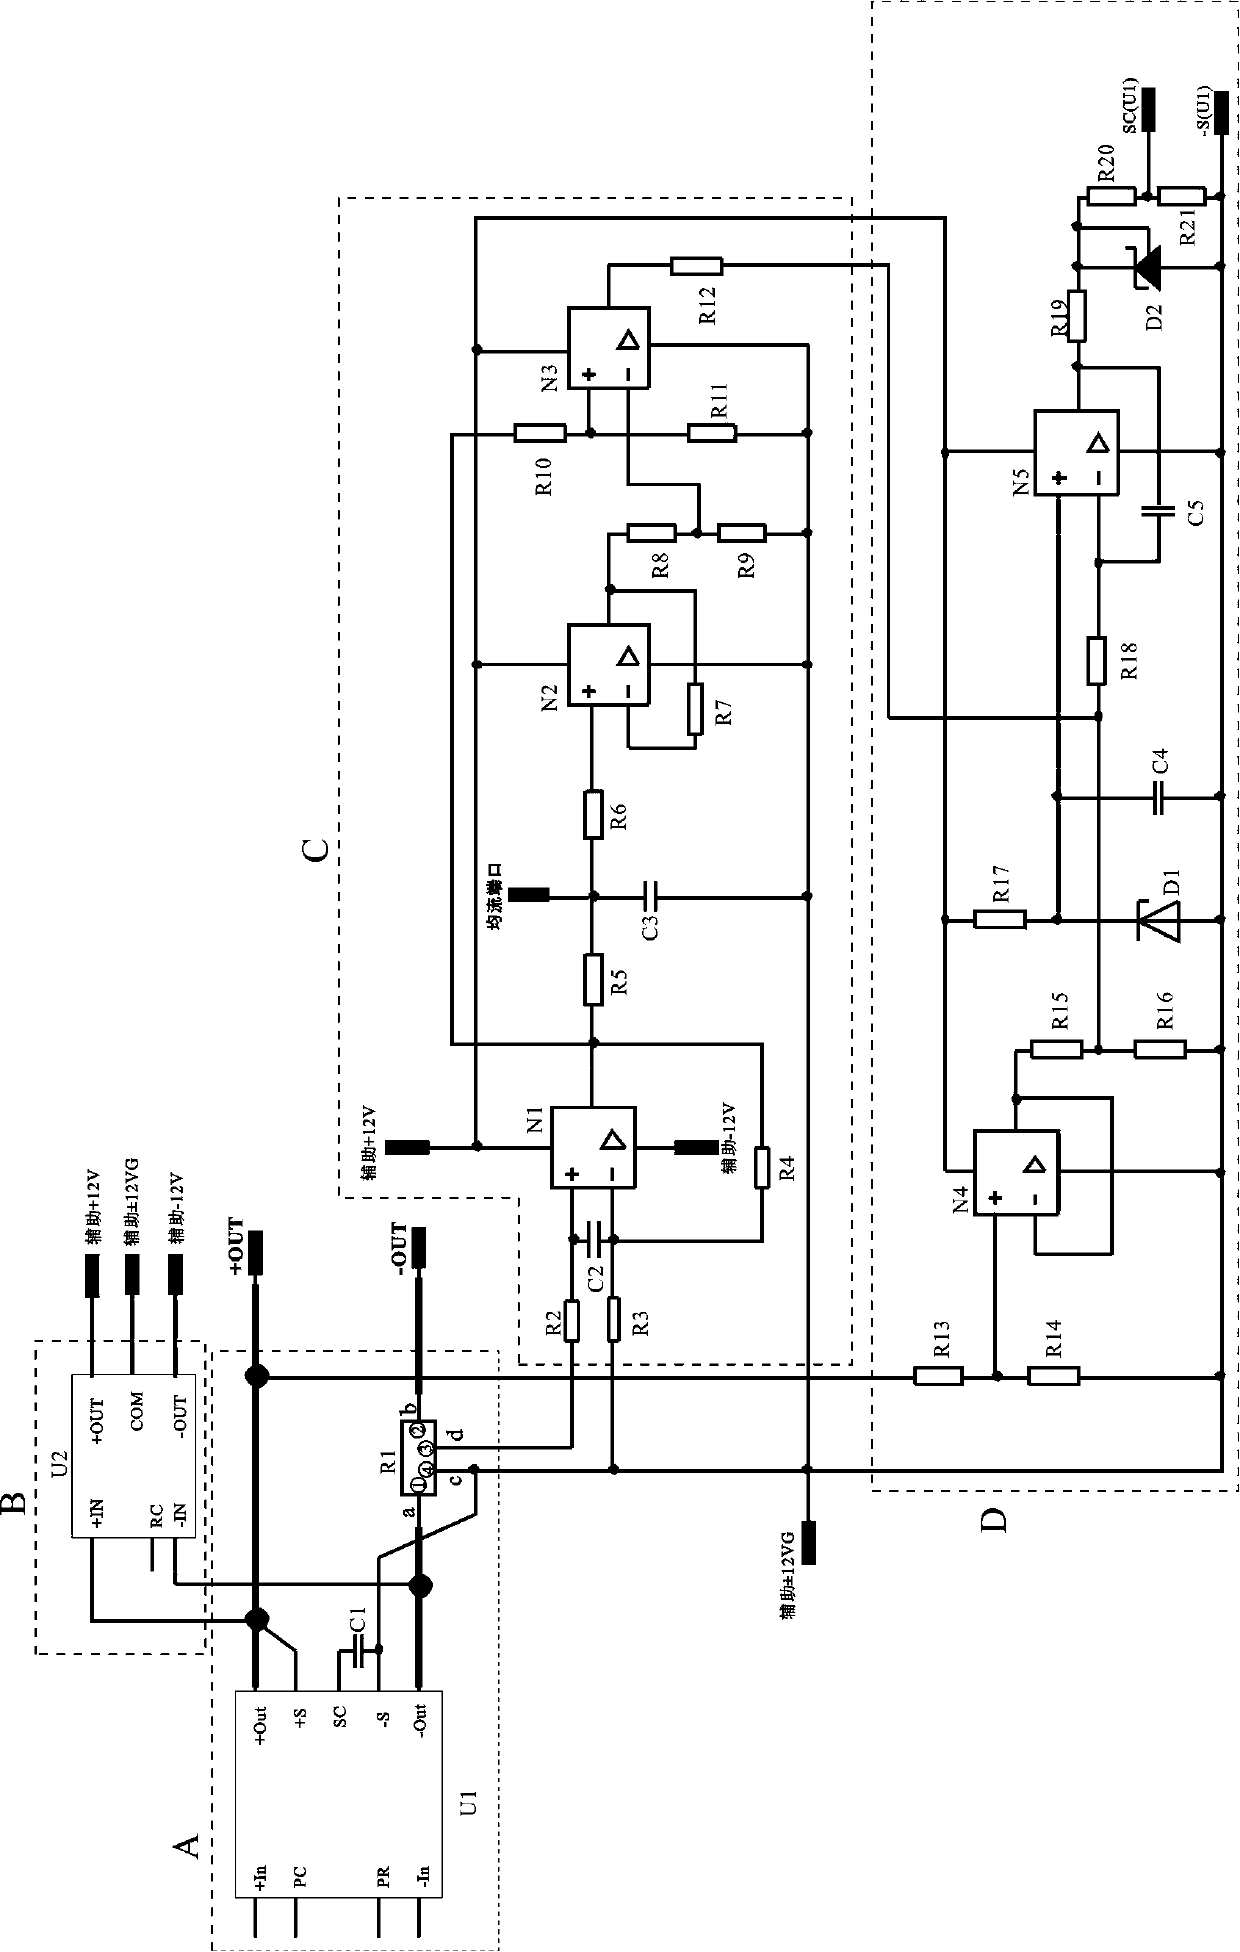 Power parallel current-sharing control circuit